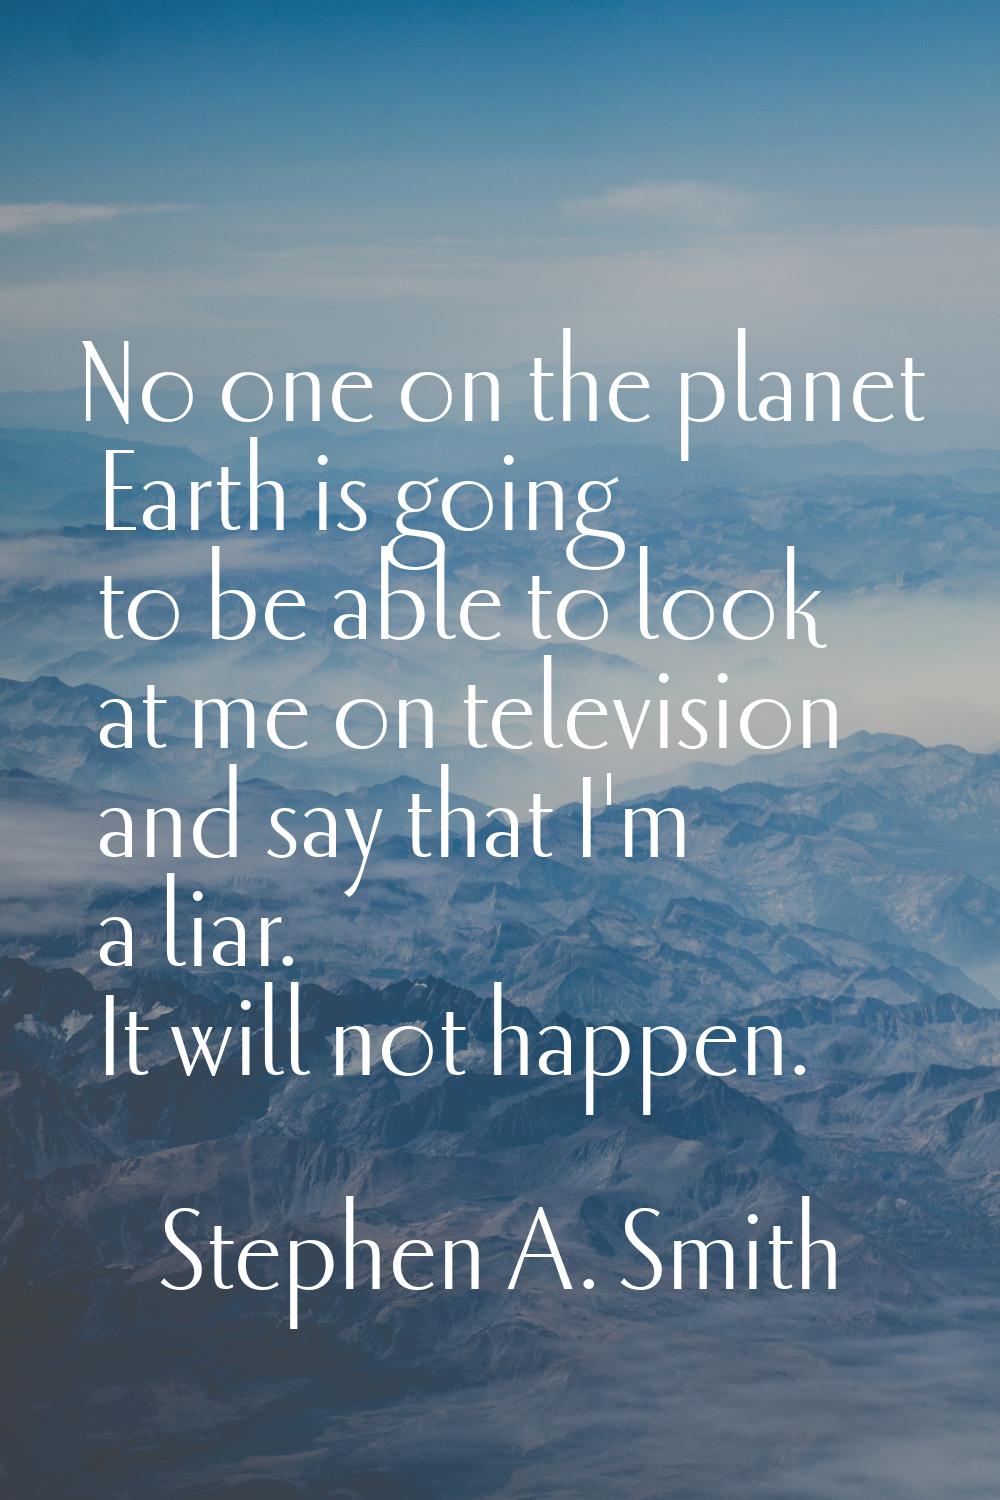 No one on the planet Earth is going to be able to look at me on television and say that I'm a liar.